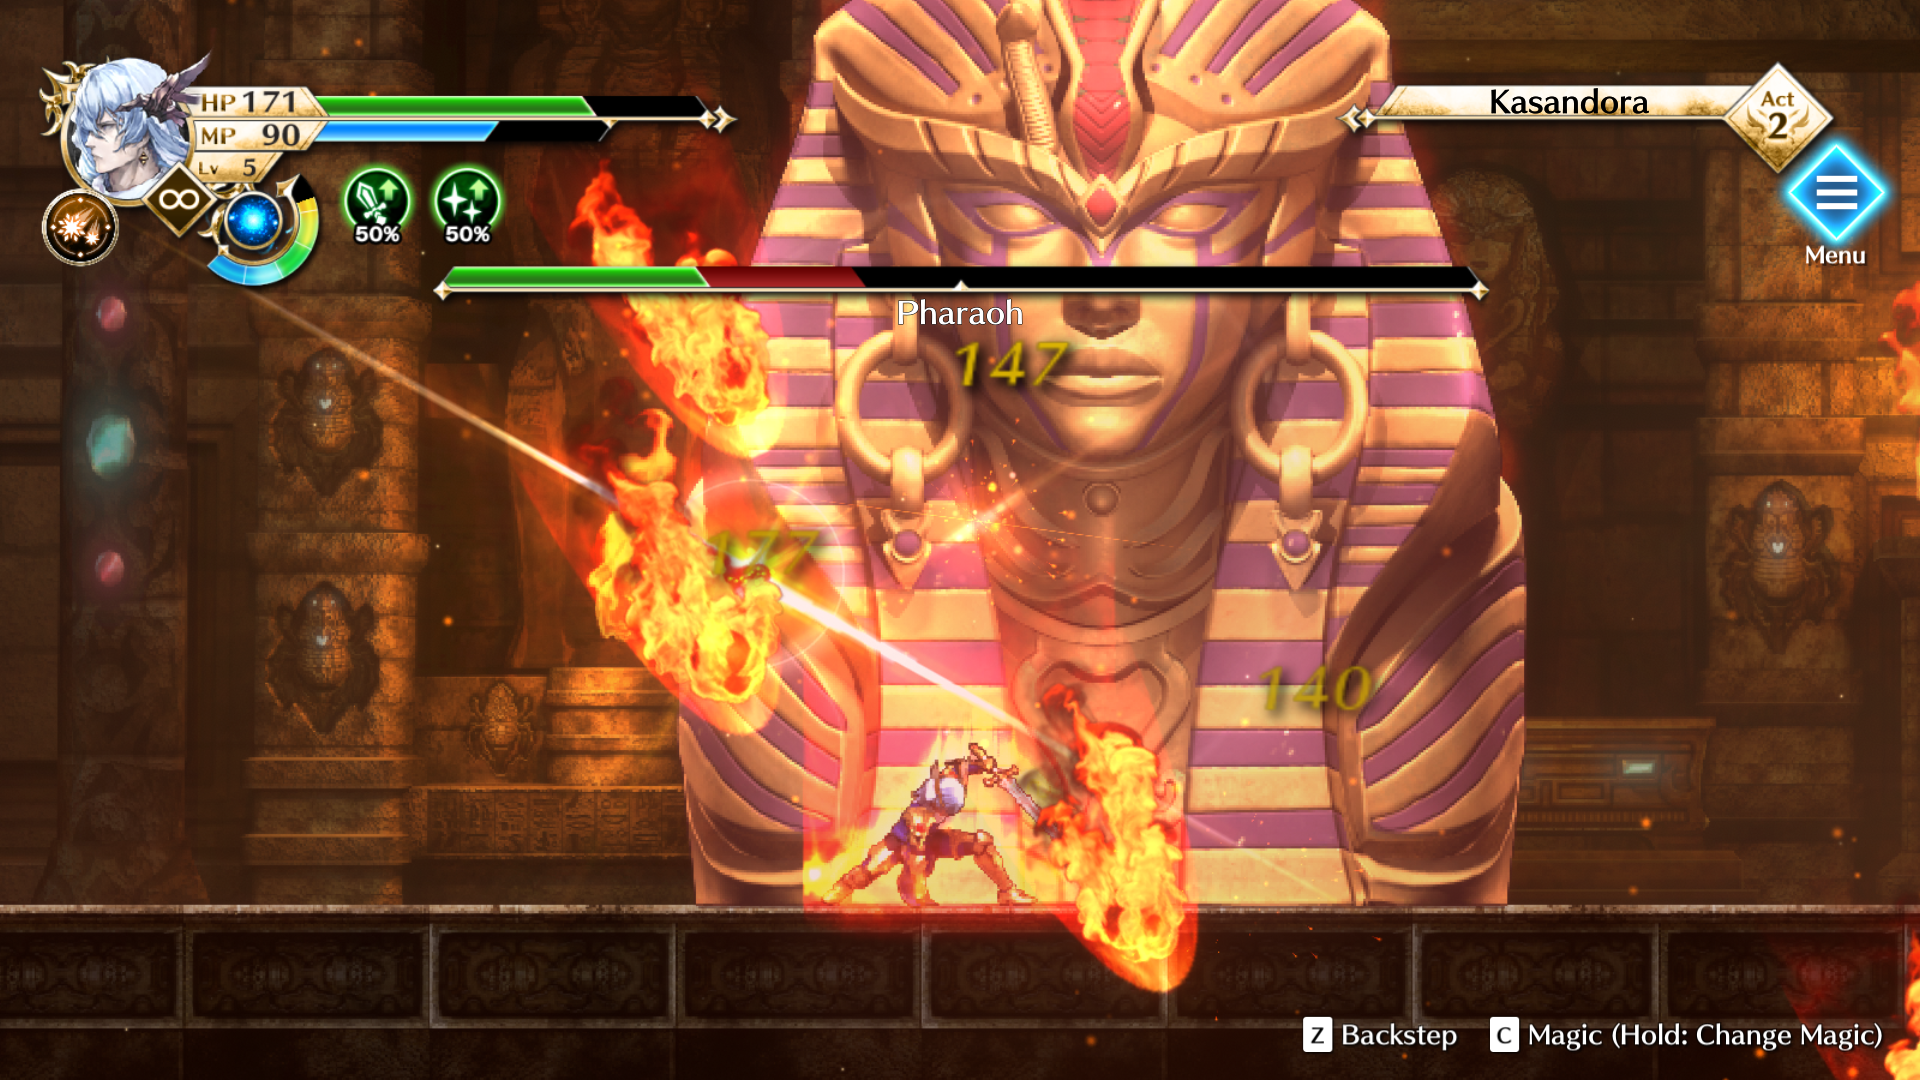 Gameplay screenshot of the Actraiser Renaissance protagonist in a battle against a Pharaoh enemy.